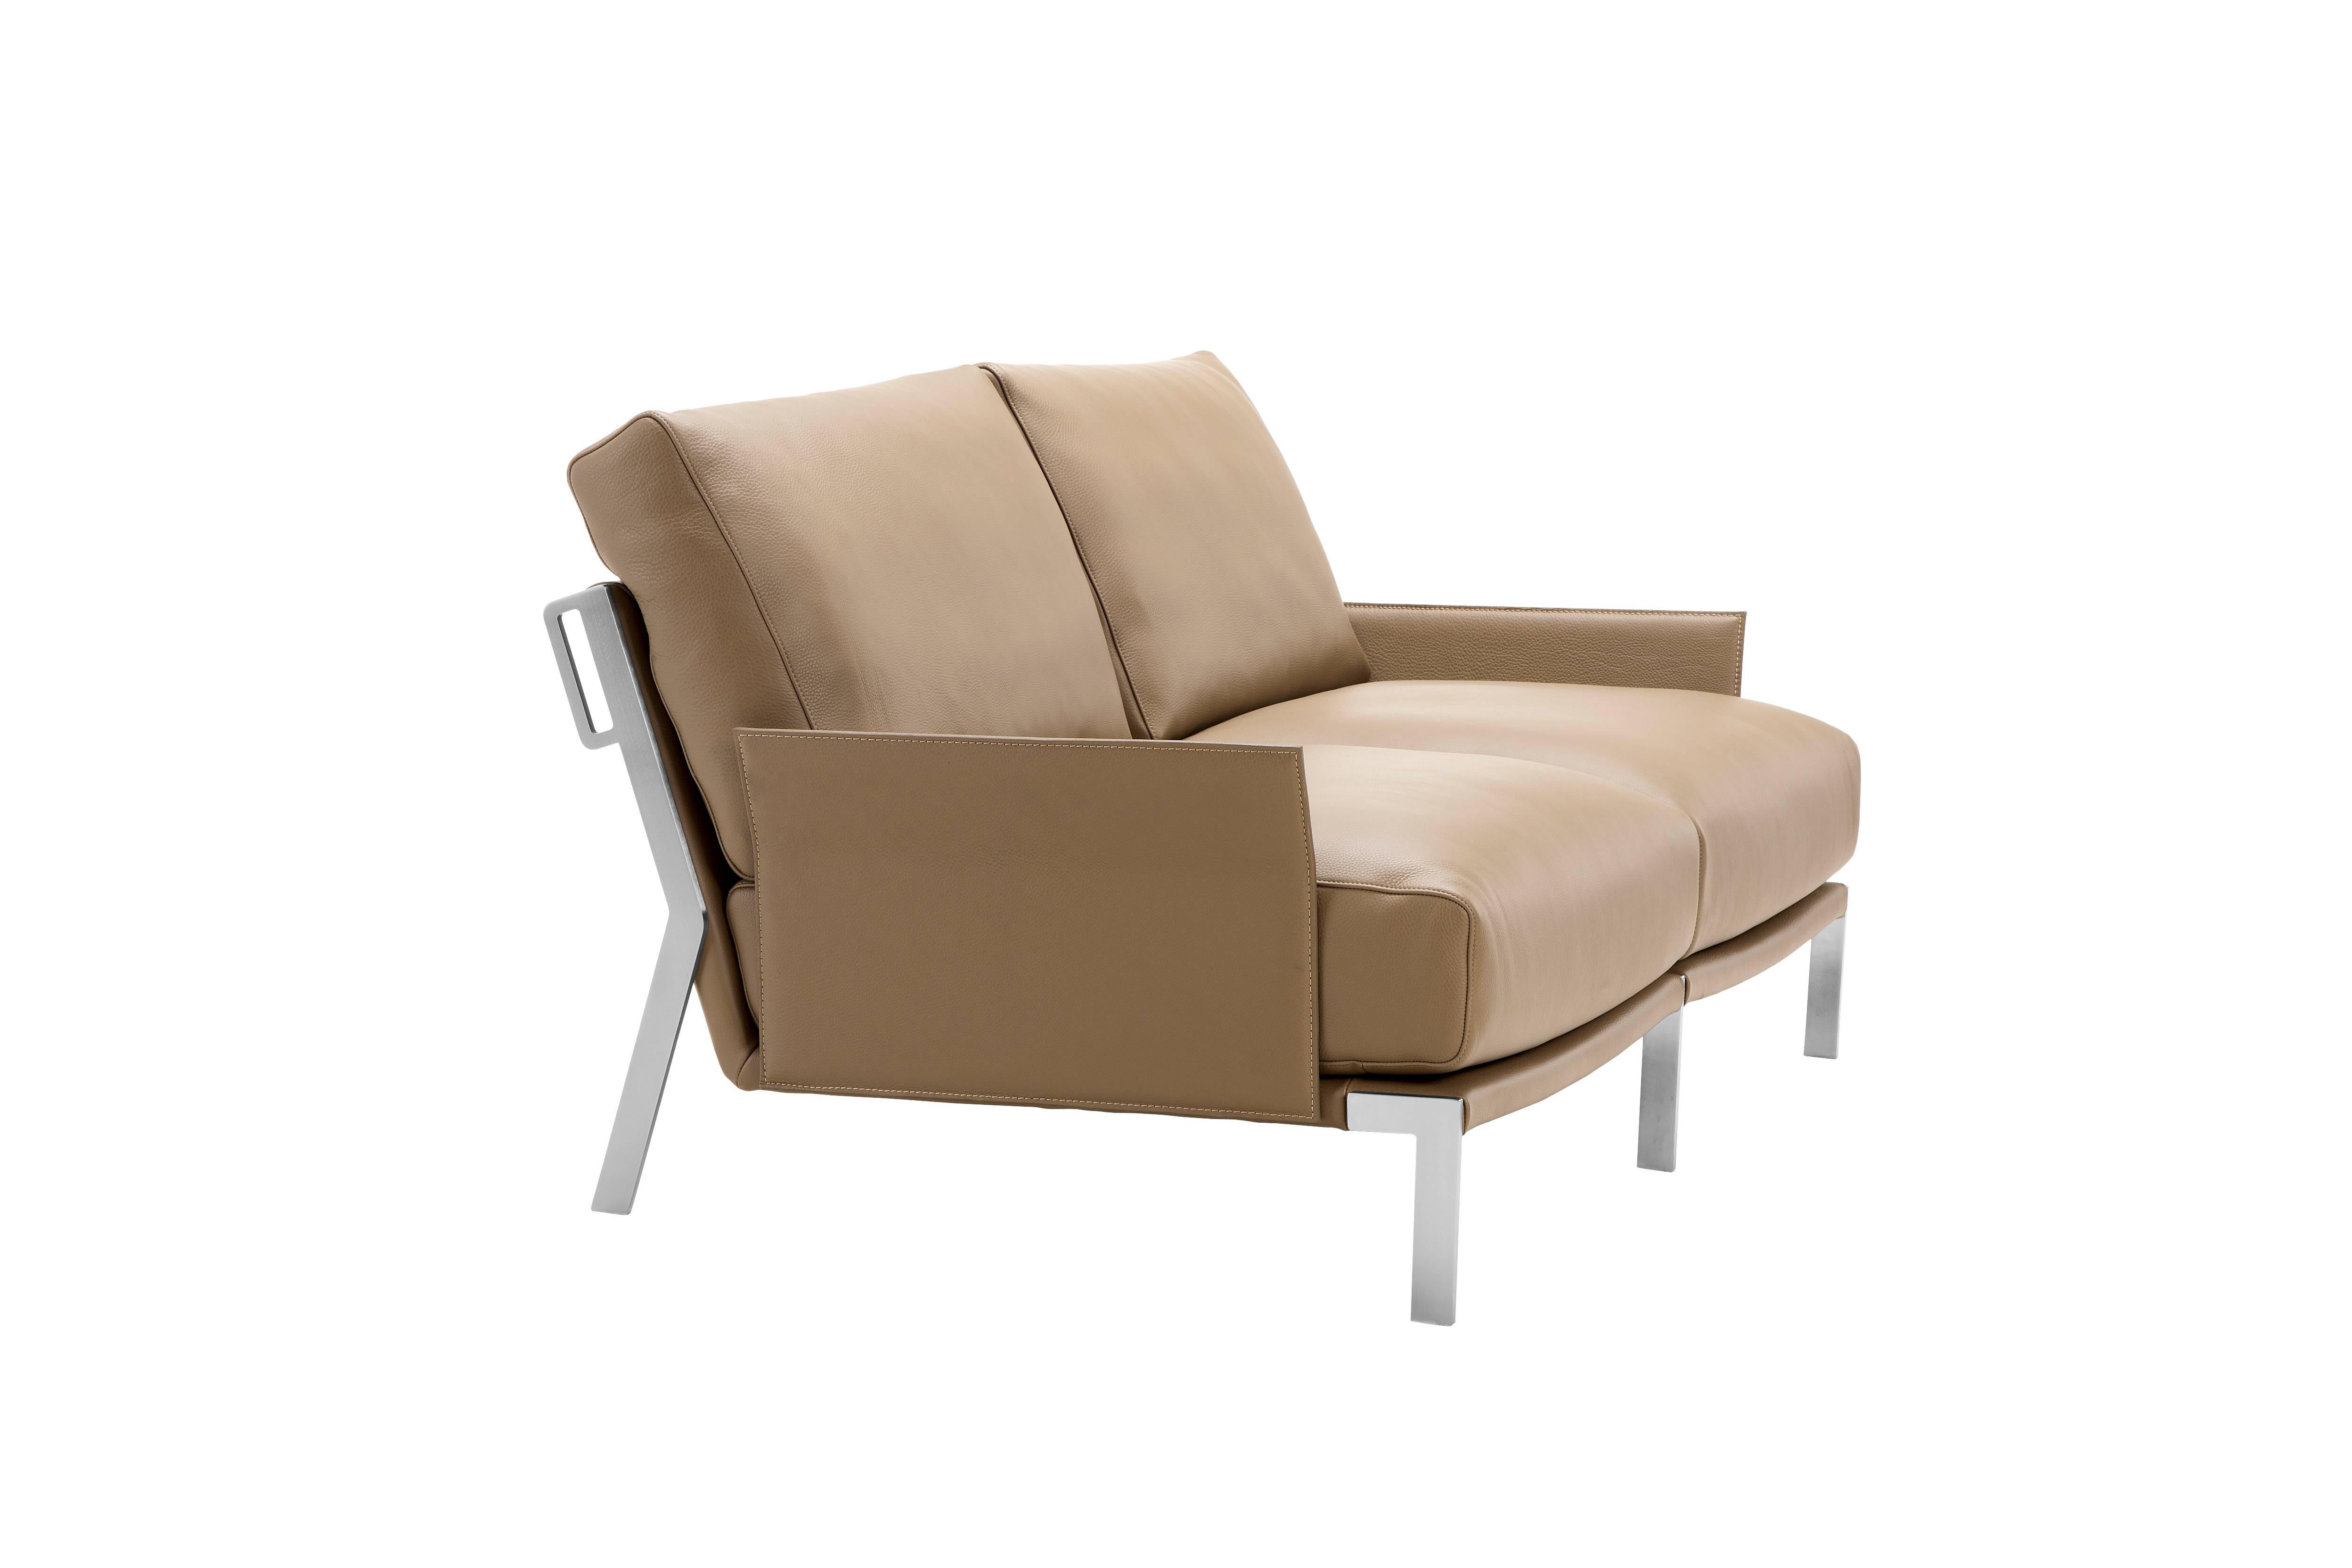 The link sofa, designed by Marconato & Zappa, demonstrates refined, modern lines. Genuine leather upholstery is available in several finishes. Back padded with goose down; seat in high density polyurethane and goose down; wood and metal internal